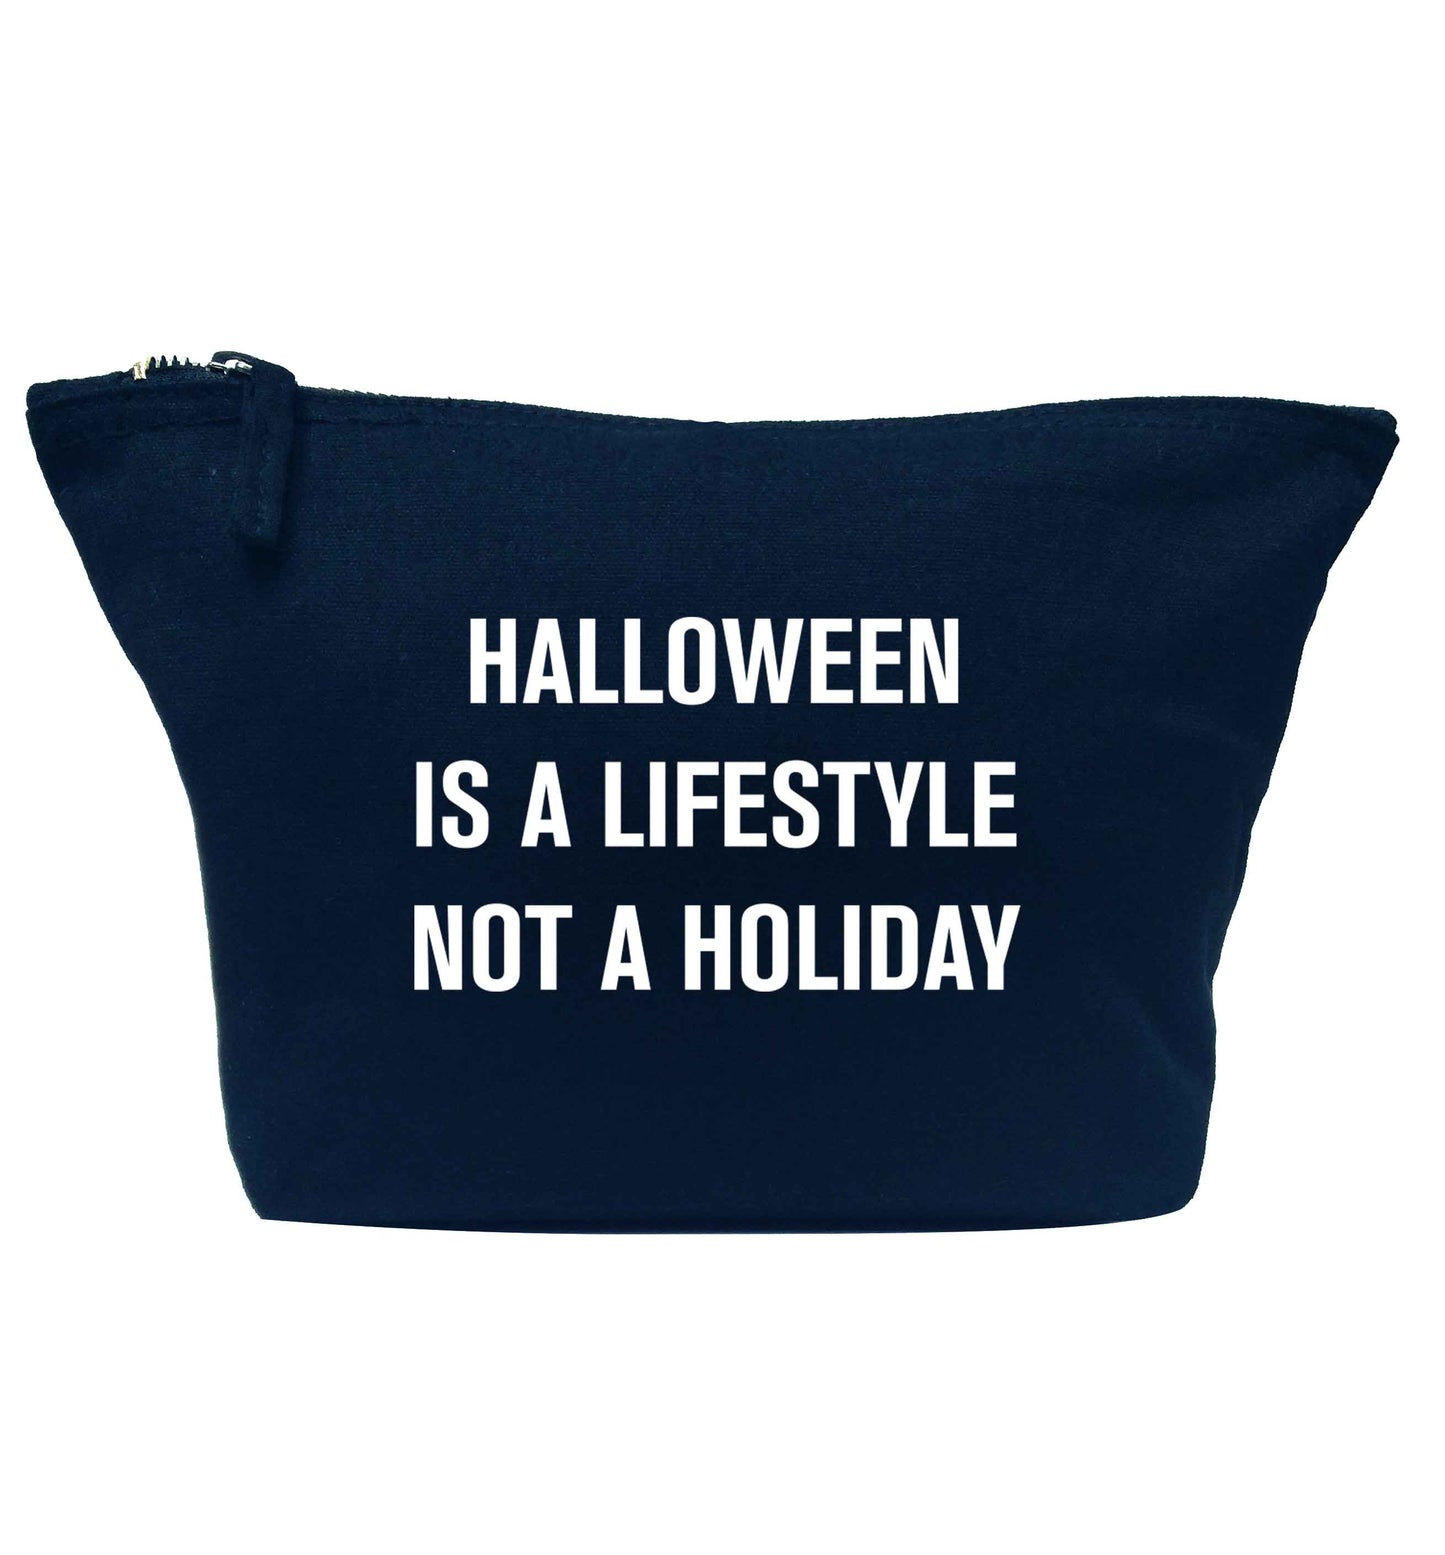 Halloween is a lifestyle not a holiday navy makeup bag